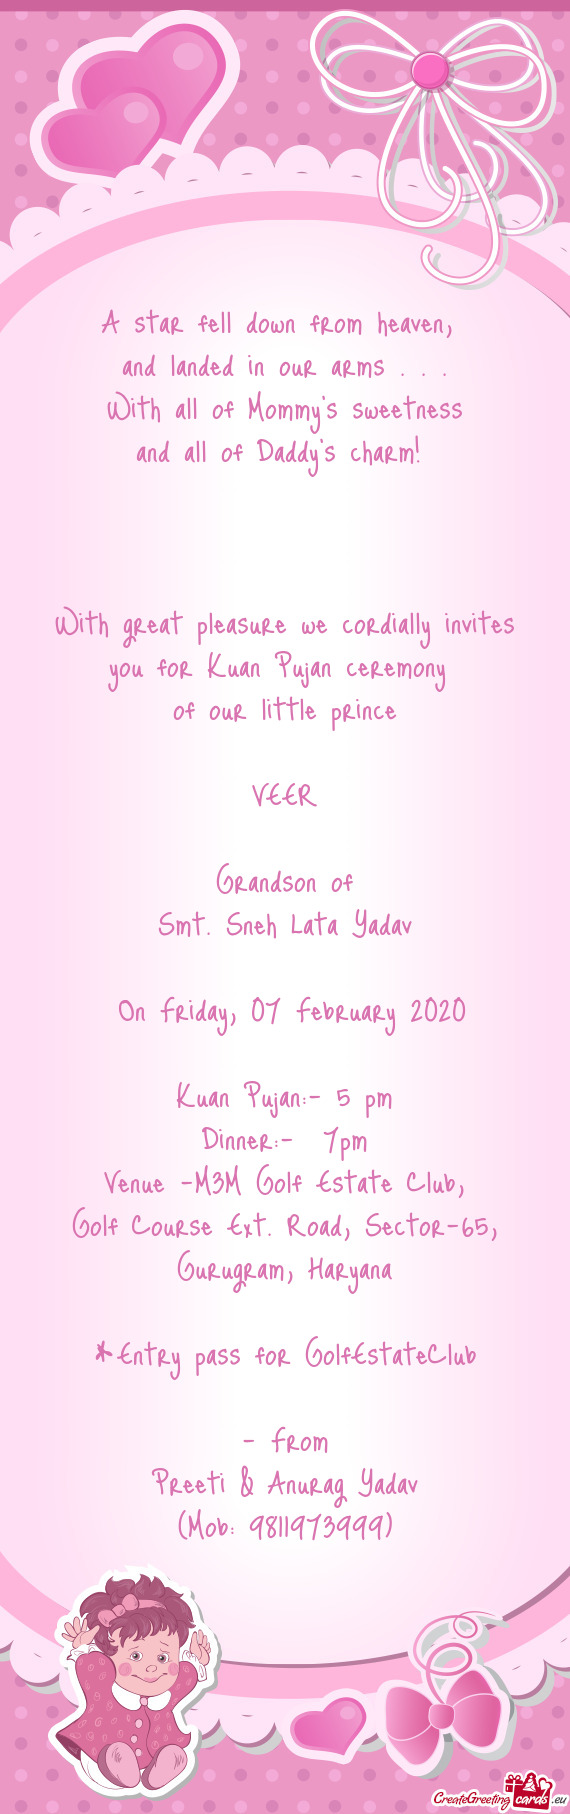 With great pleasure we cordially invites you for Kuan Pujan ceremony